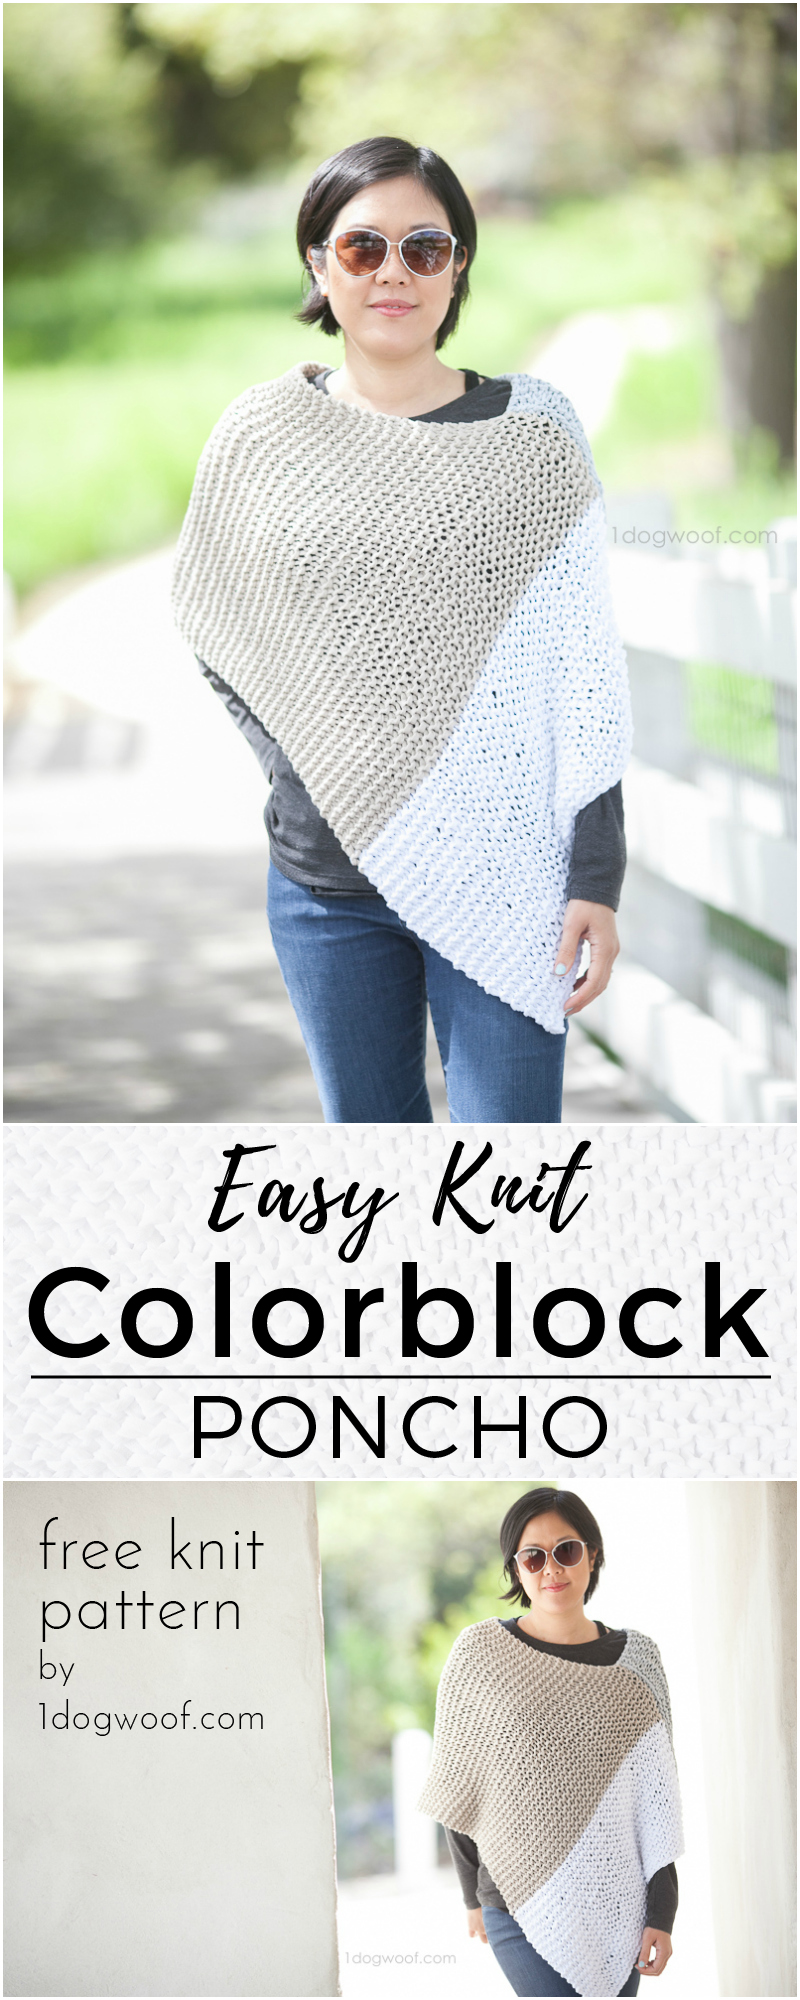 Easy Knit Catalunya Colorblock Poncho: free knitting pattern. A modern colorblock wrap or poncho using a simple knit garter stitch! Photo by Jeune Girl Studio | 1dogwoof.com